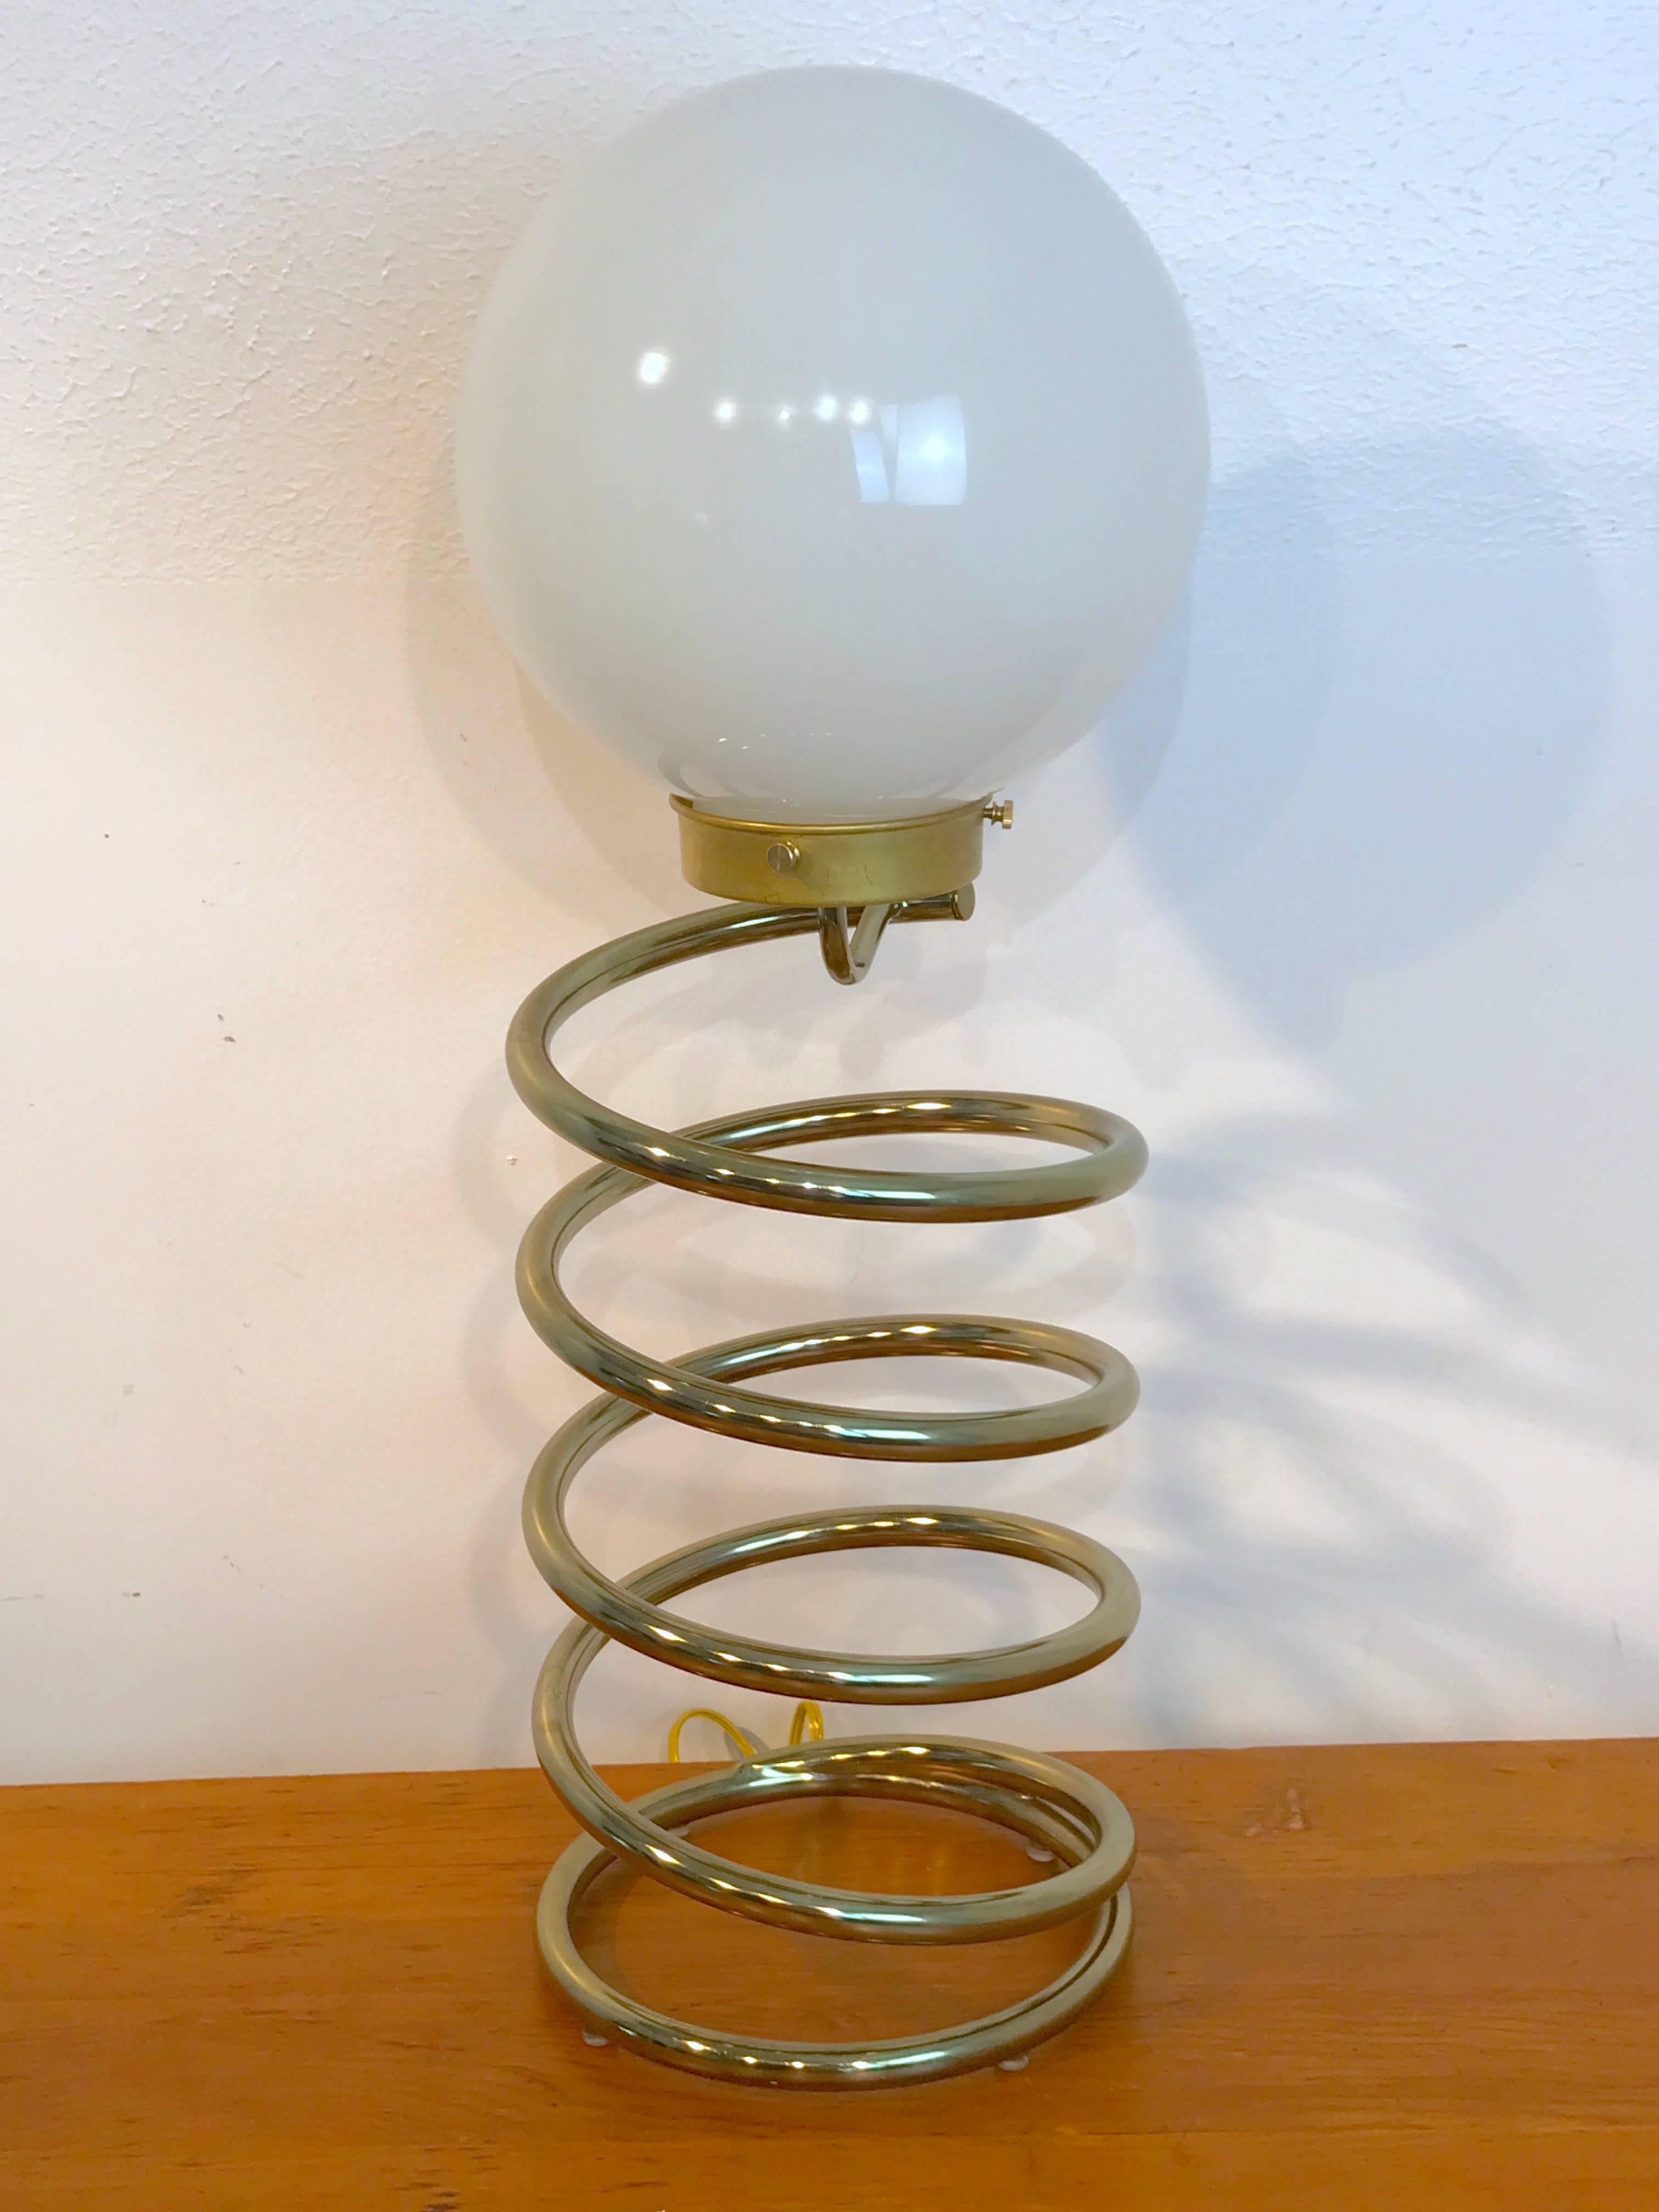 Large Ingo Maurer Spring Table Lamp, circa 1965
1960s, Europe
Dimensions: Height: 27 in Diameter: 9 in

Light up your home with the elegance of the past with this large Ingo Maurer Spring table lamp. Designed by the German lighting mastermind, Ingo